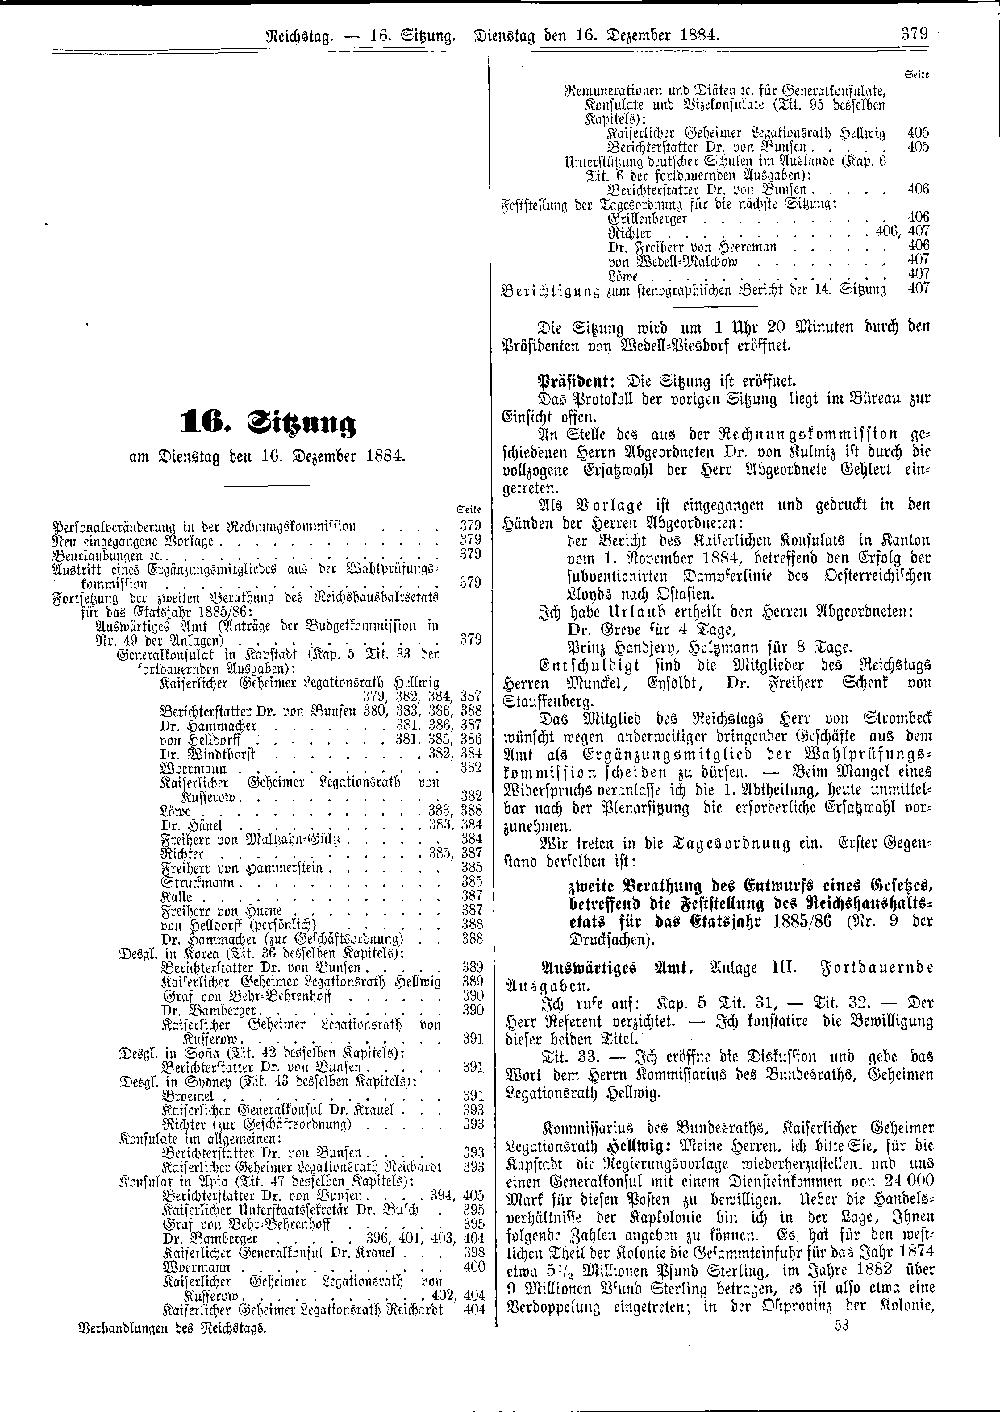 Scan of page 379